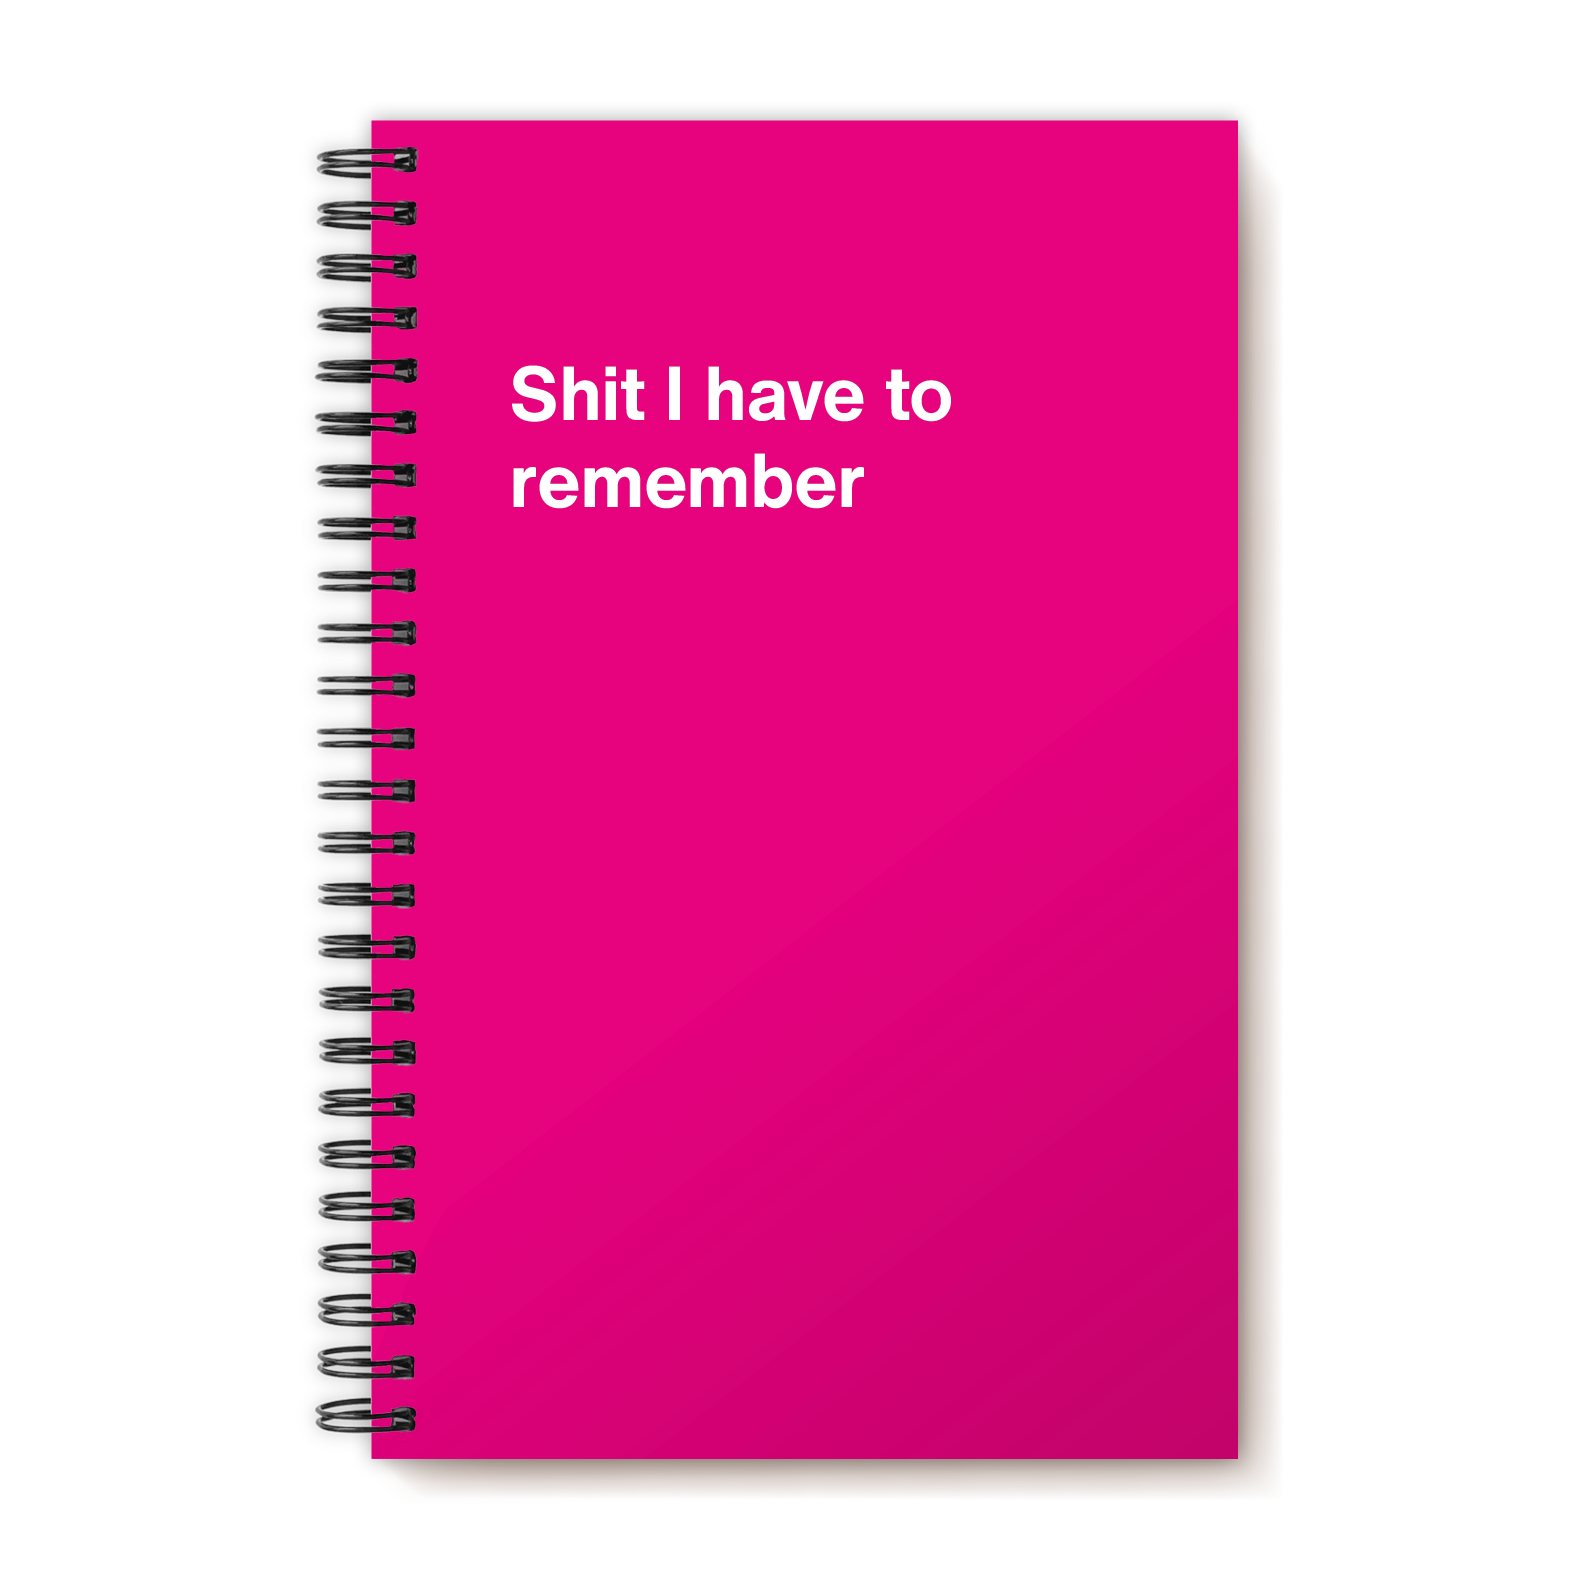 Fuck It All GIFT SET. Notepad and Pens Gift Set. Funny humor gifts